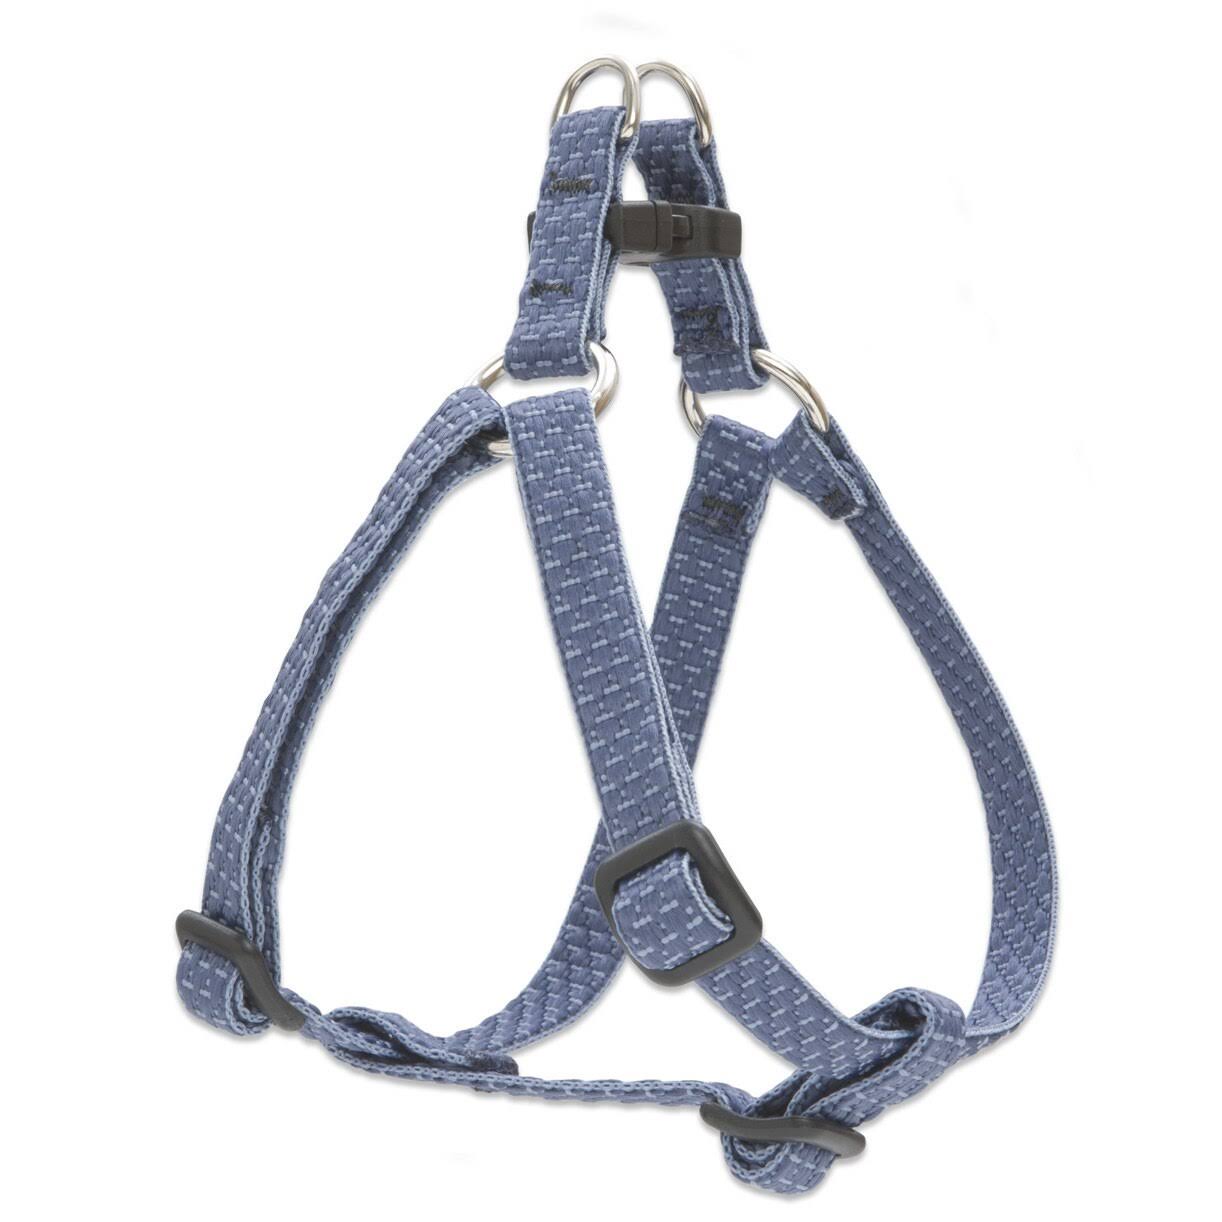 LupinePet Eco 1/2" Mountain Lake 12-18" Step in Harness for Small Dogs